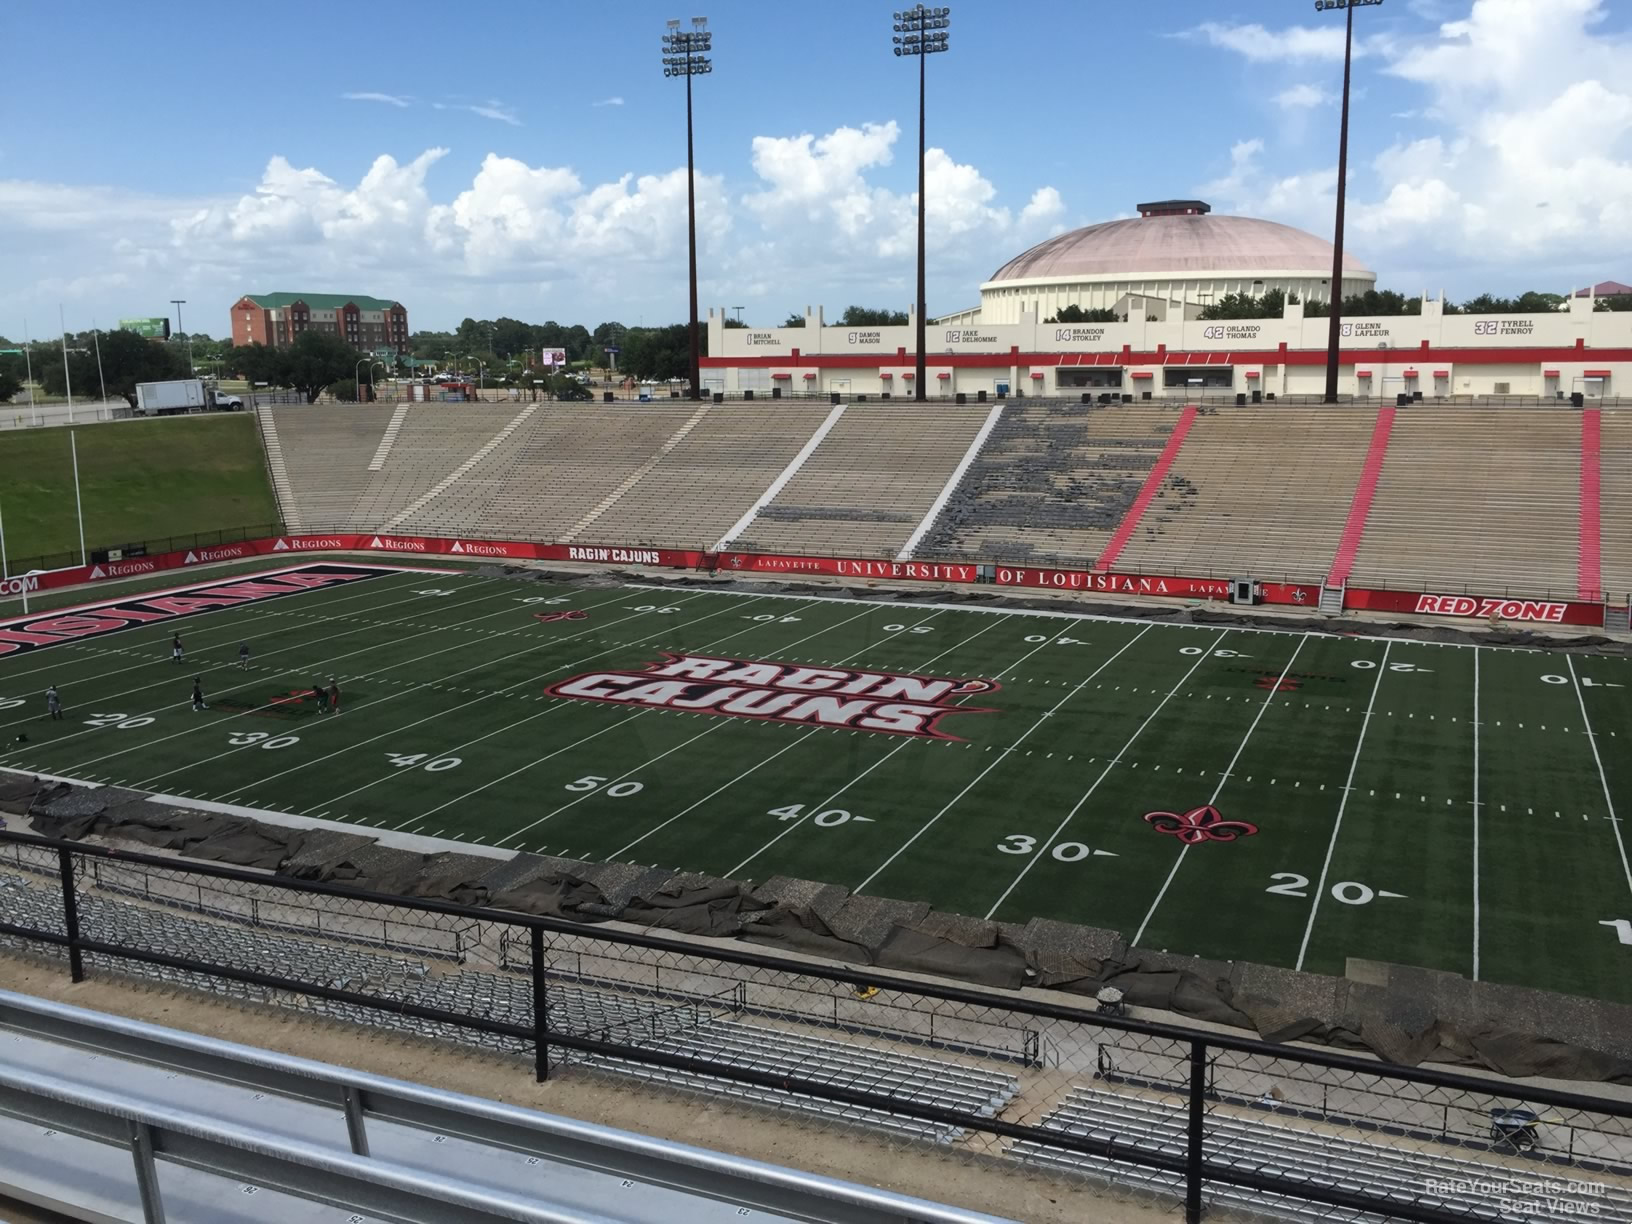 section bb, row 6 seat view  - cajun field